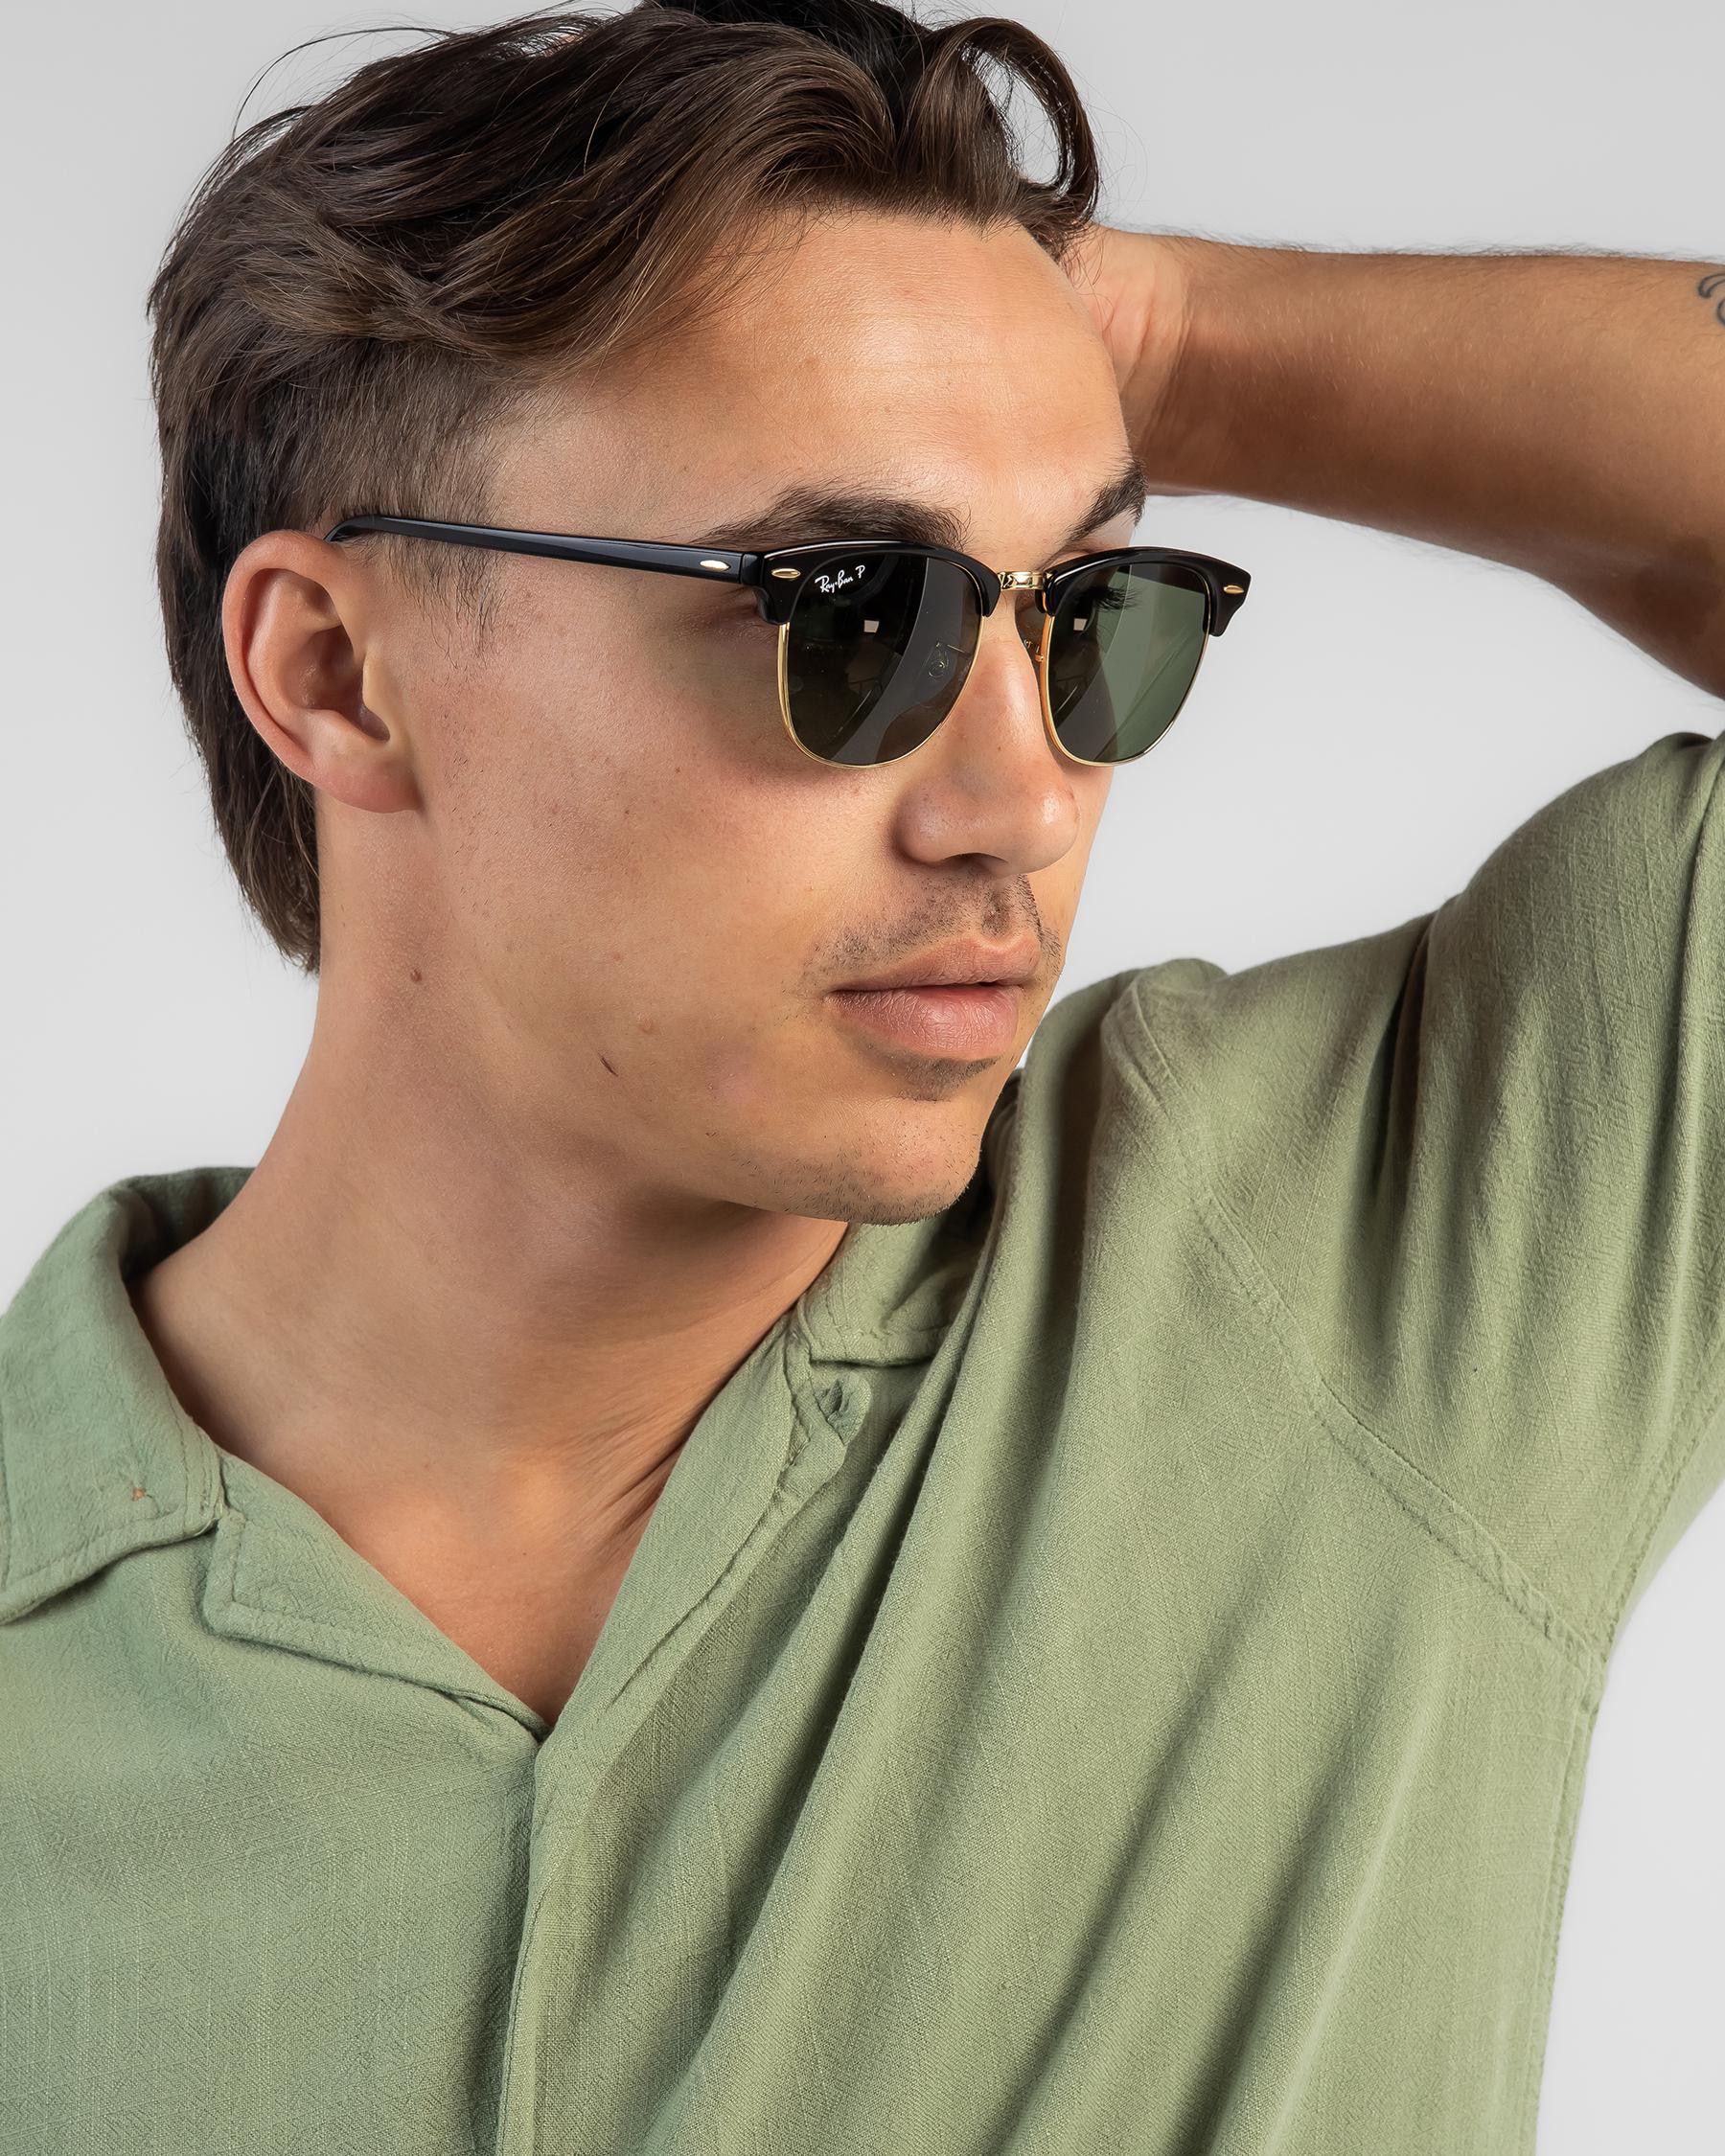 Ray Ban Clubmaster For Men | lupon.gov.ph